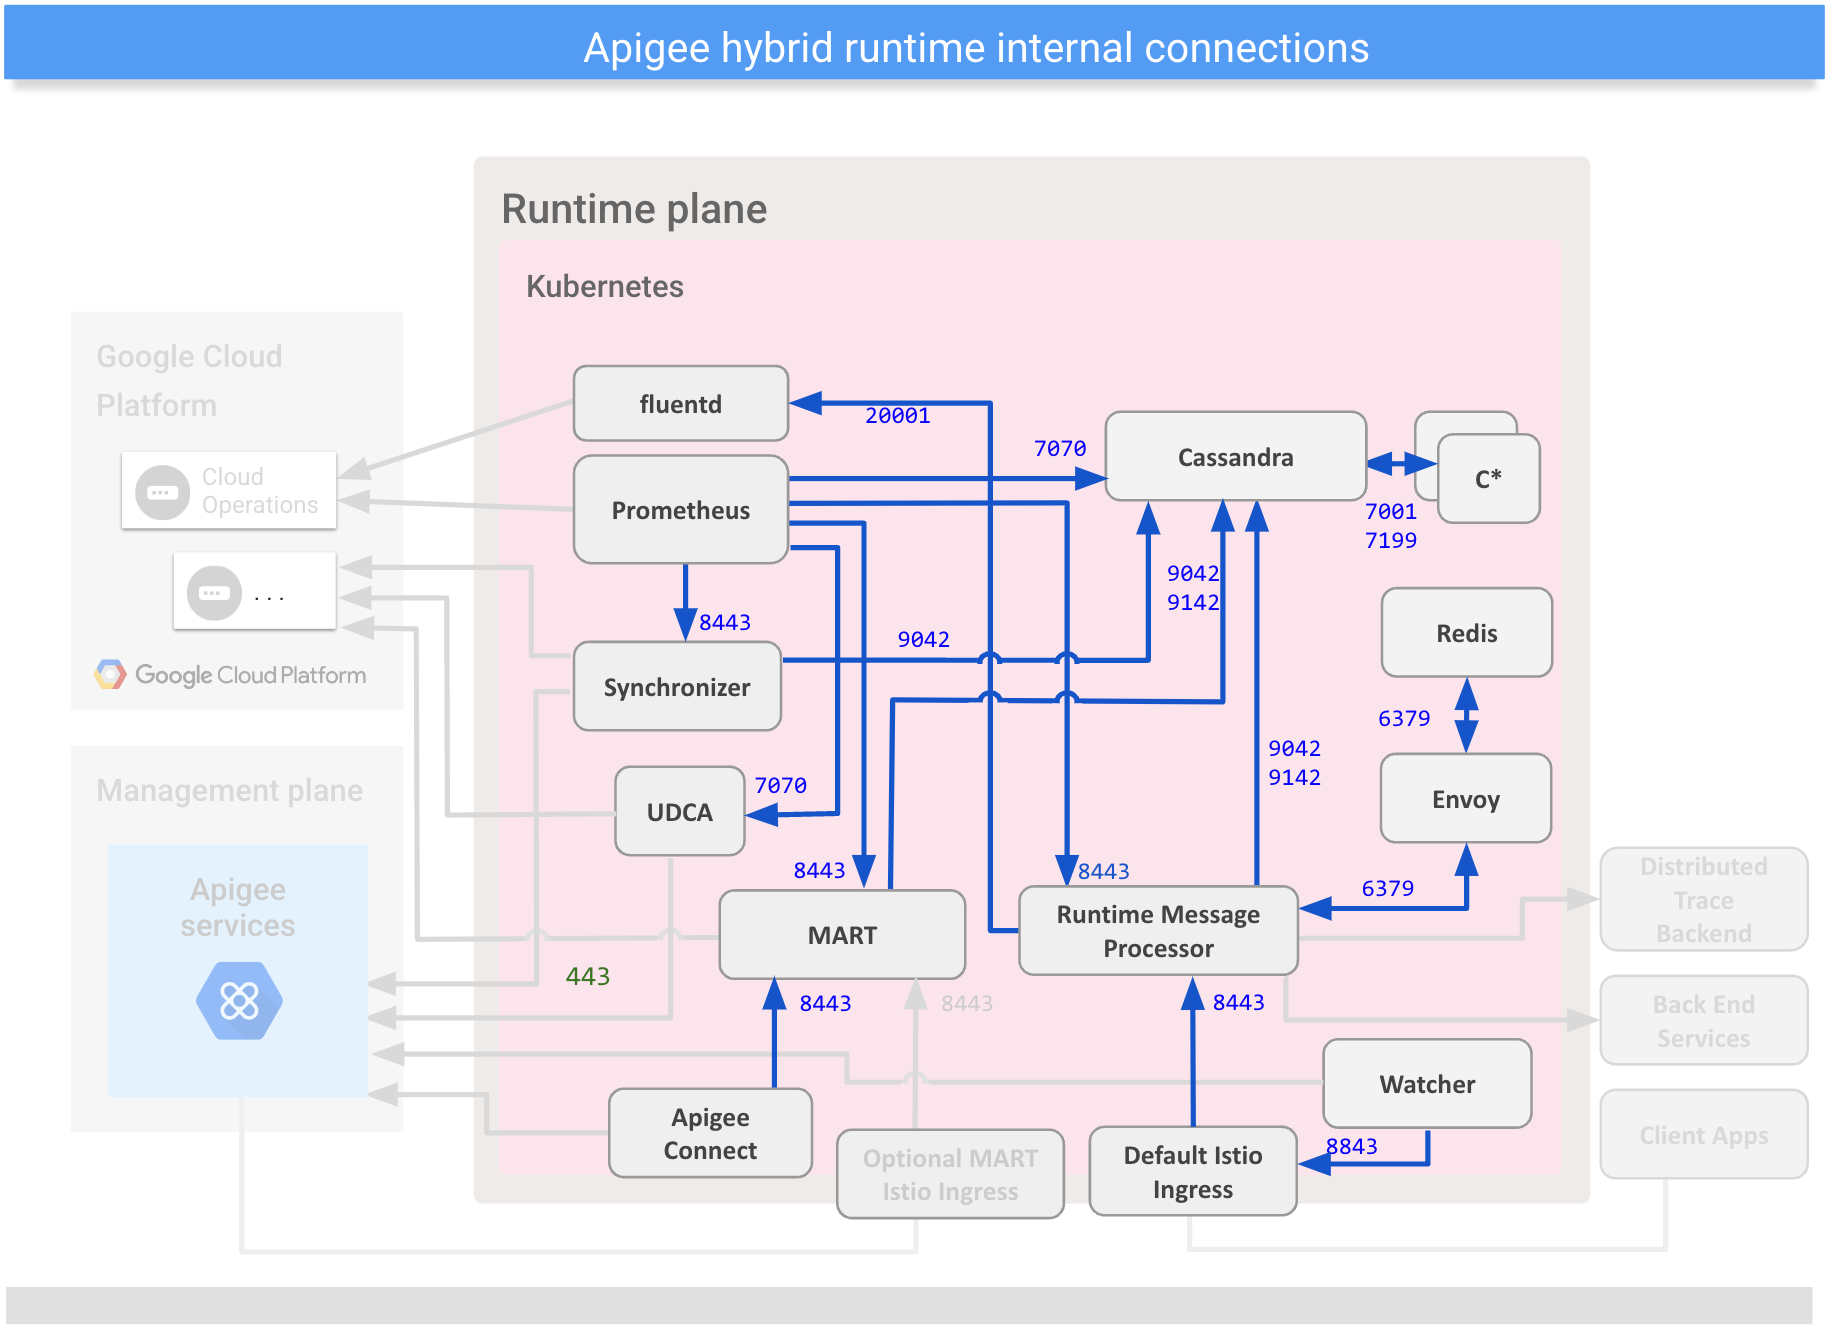 Shows connections
between internal components on the hybrid runtime plane